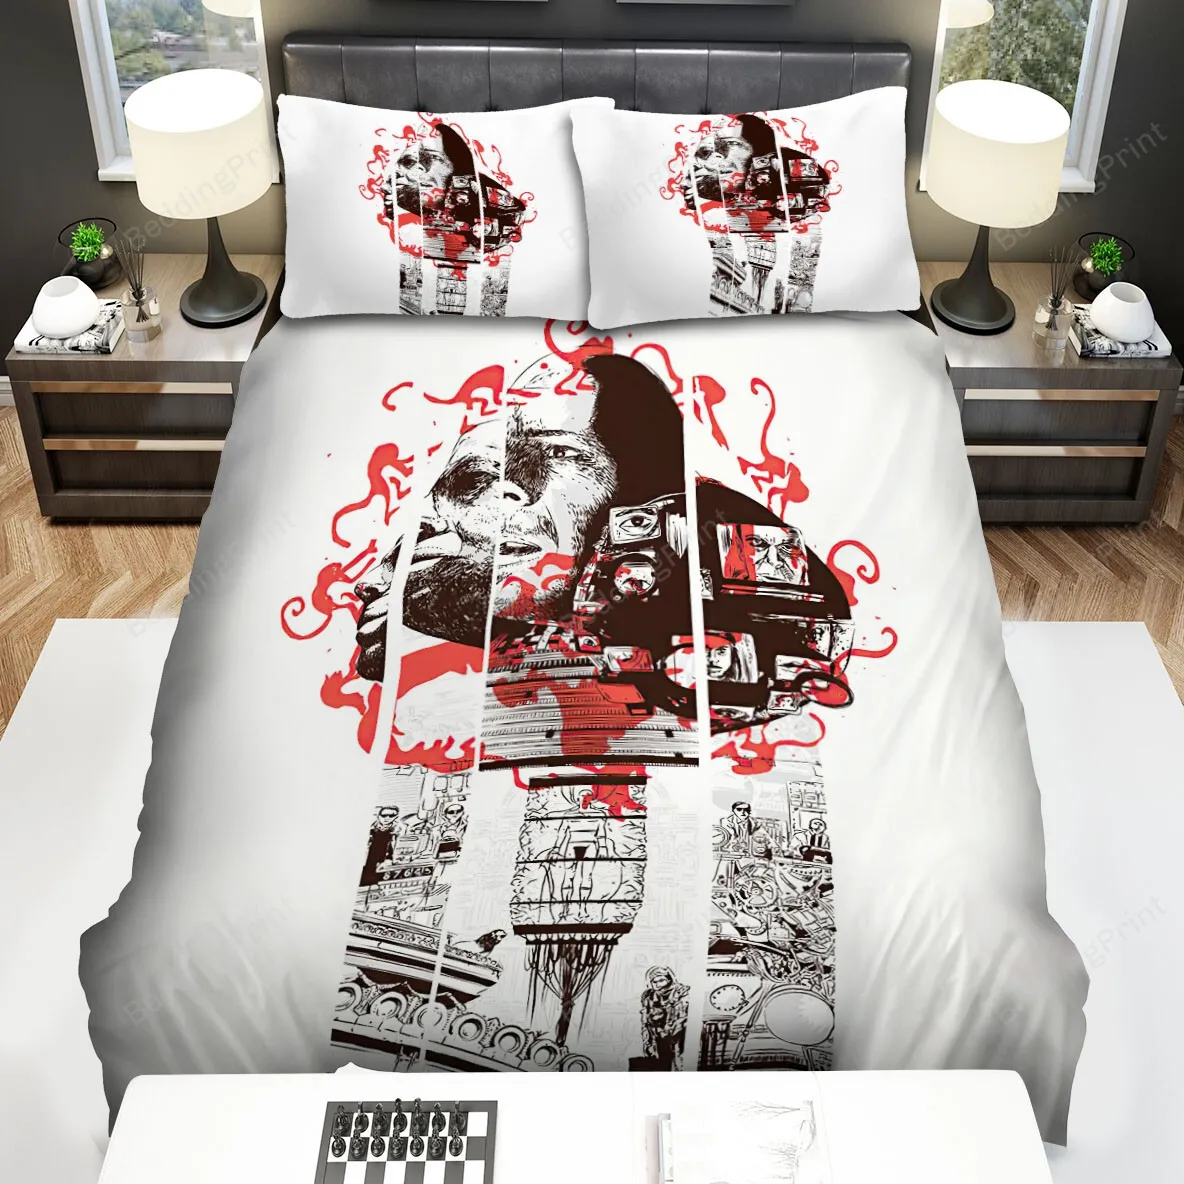 12 Monkeys (20152018) White, Black And Red Movie Poster Bed Sheets Spread Comforter Duvet Cover Bedding Sets